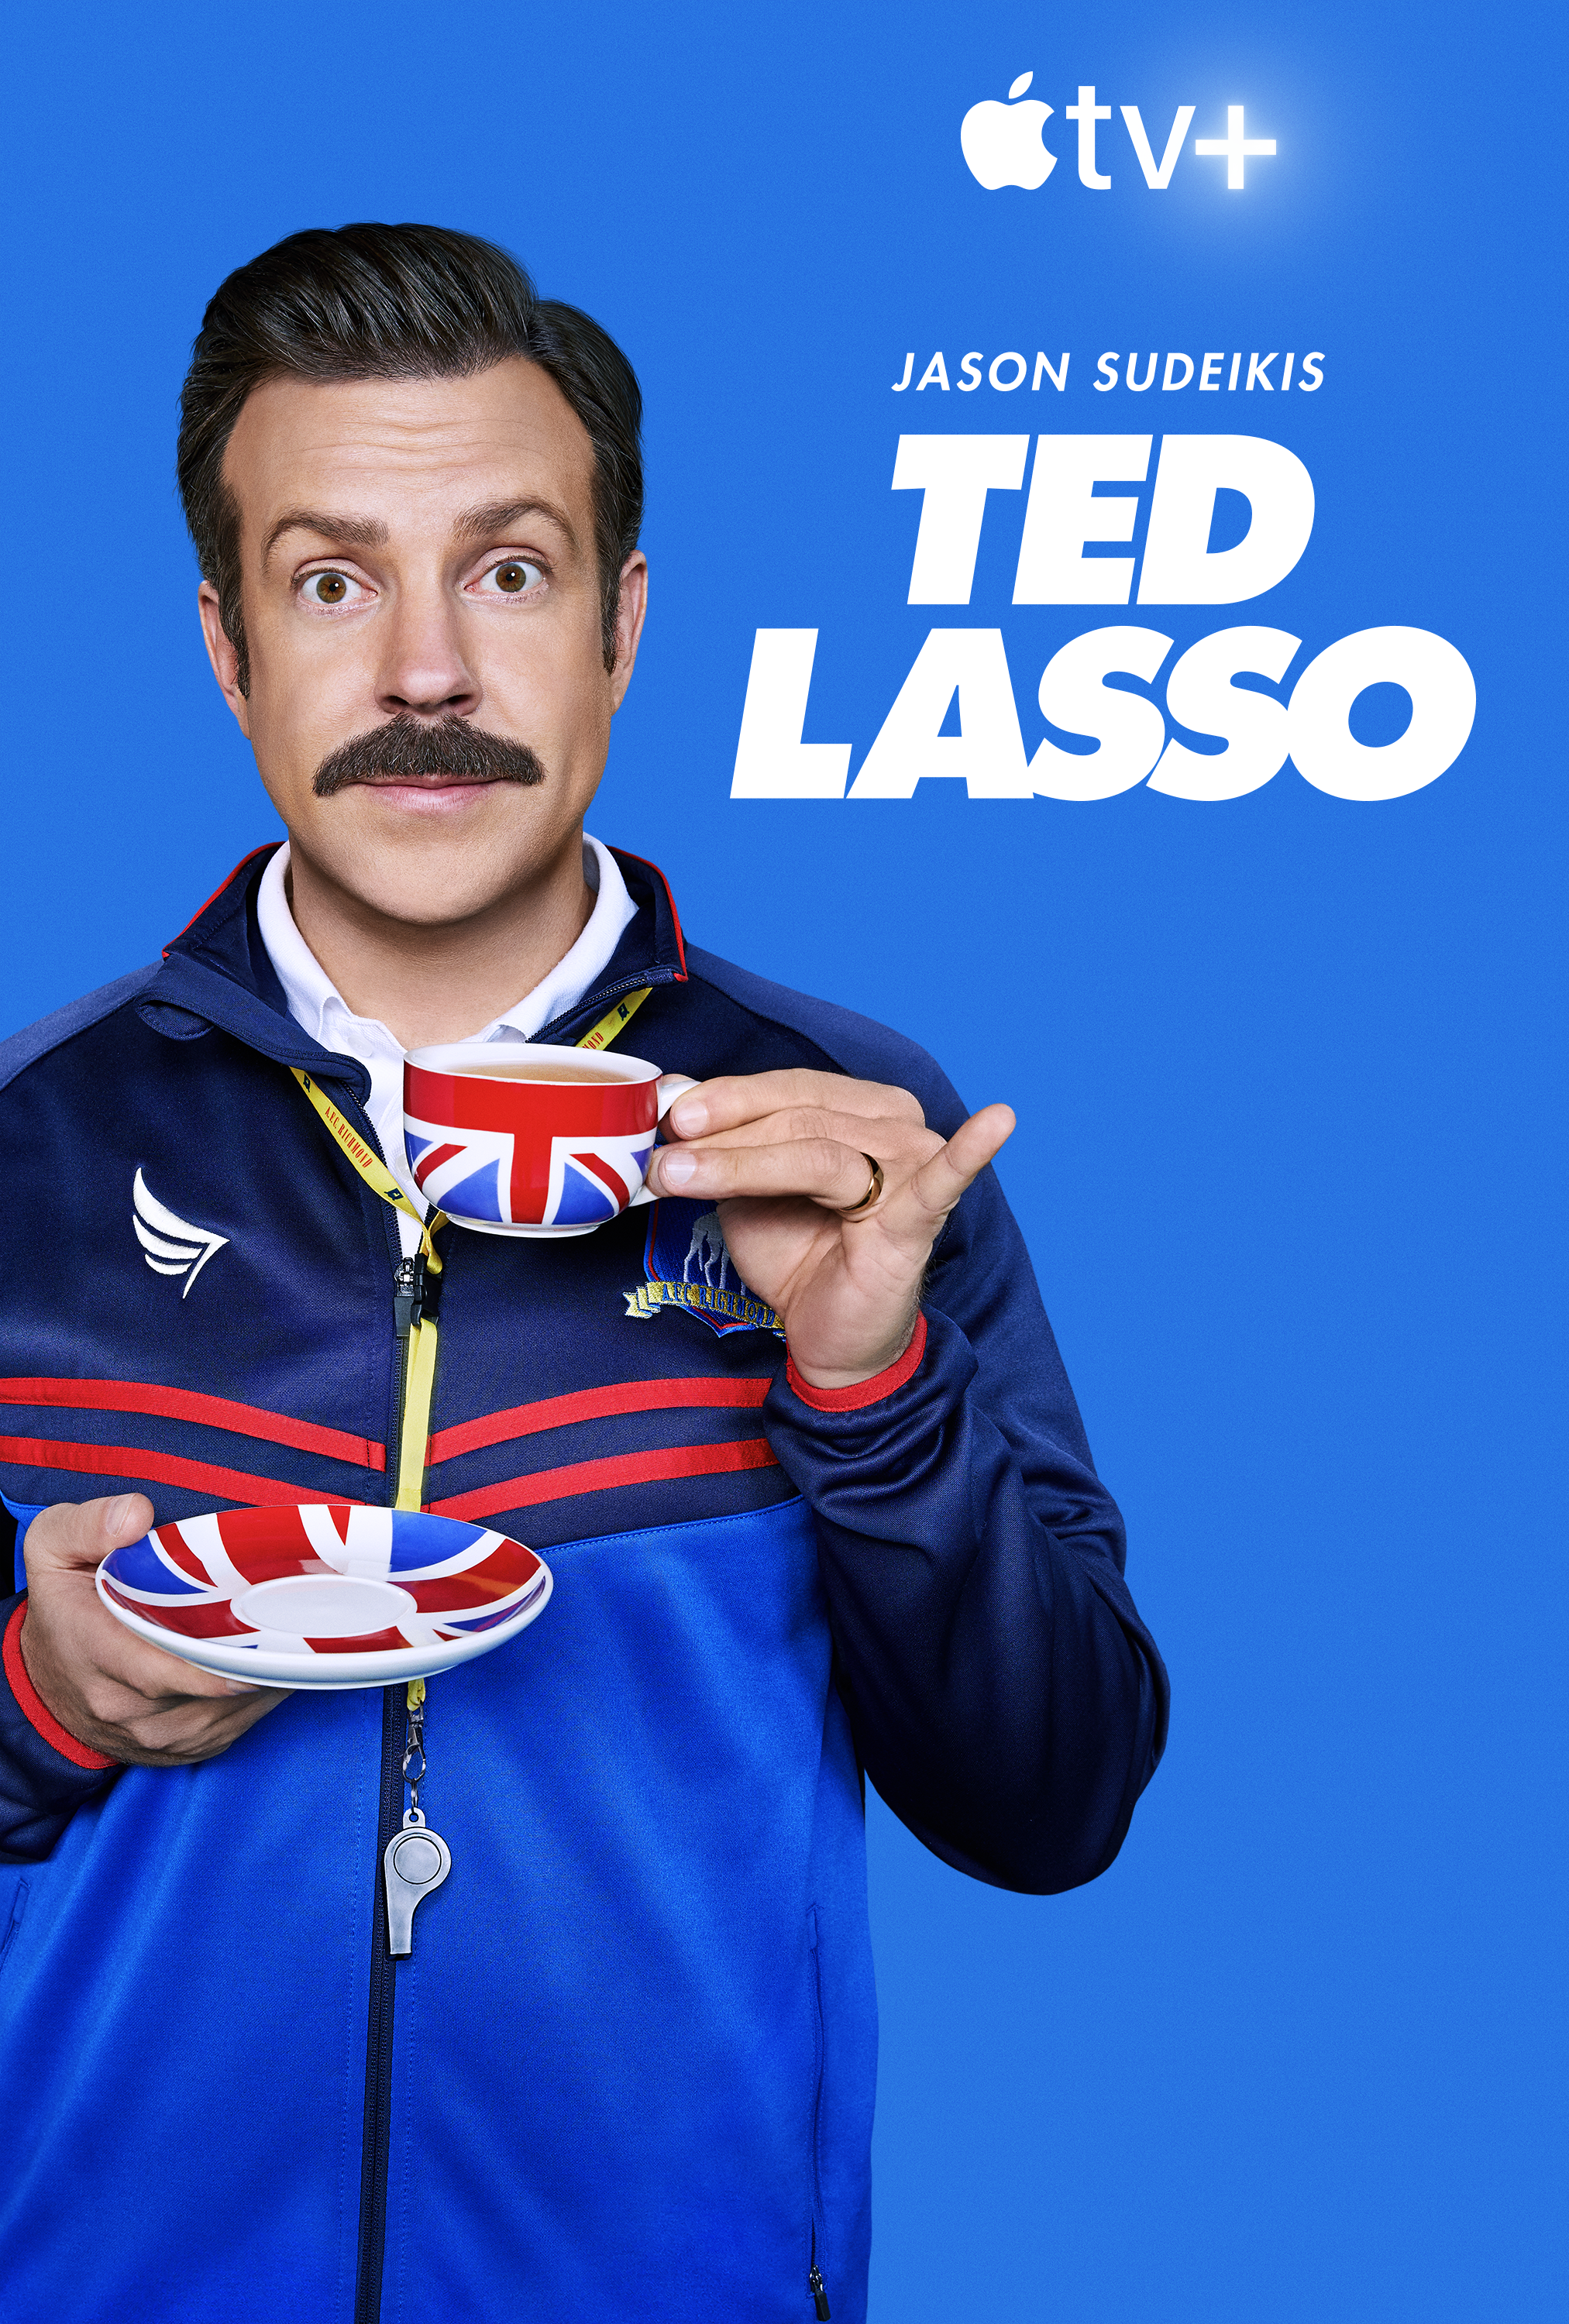 Ted Lasso Rotten Tomatoes